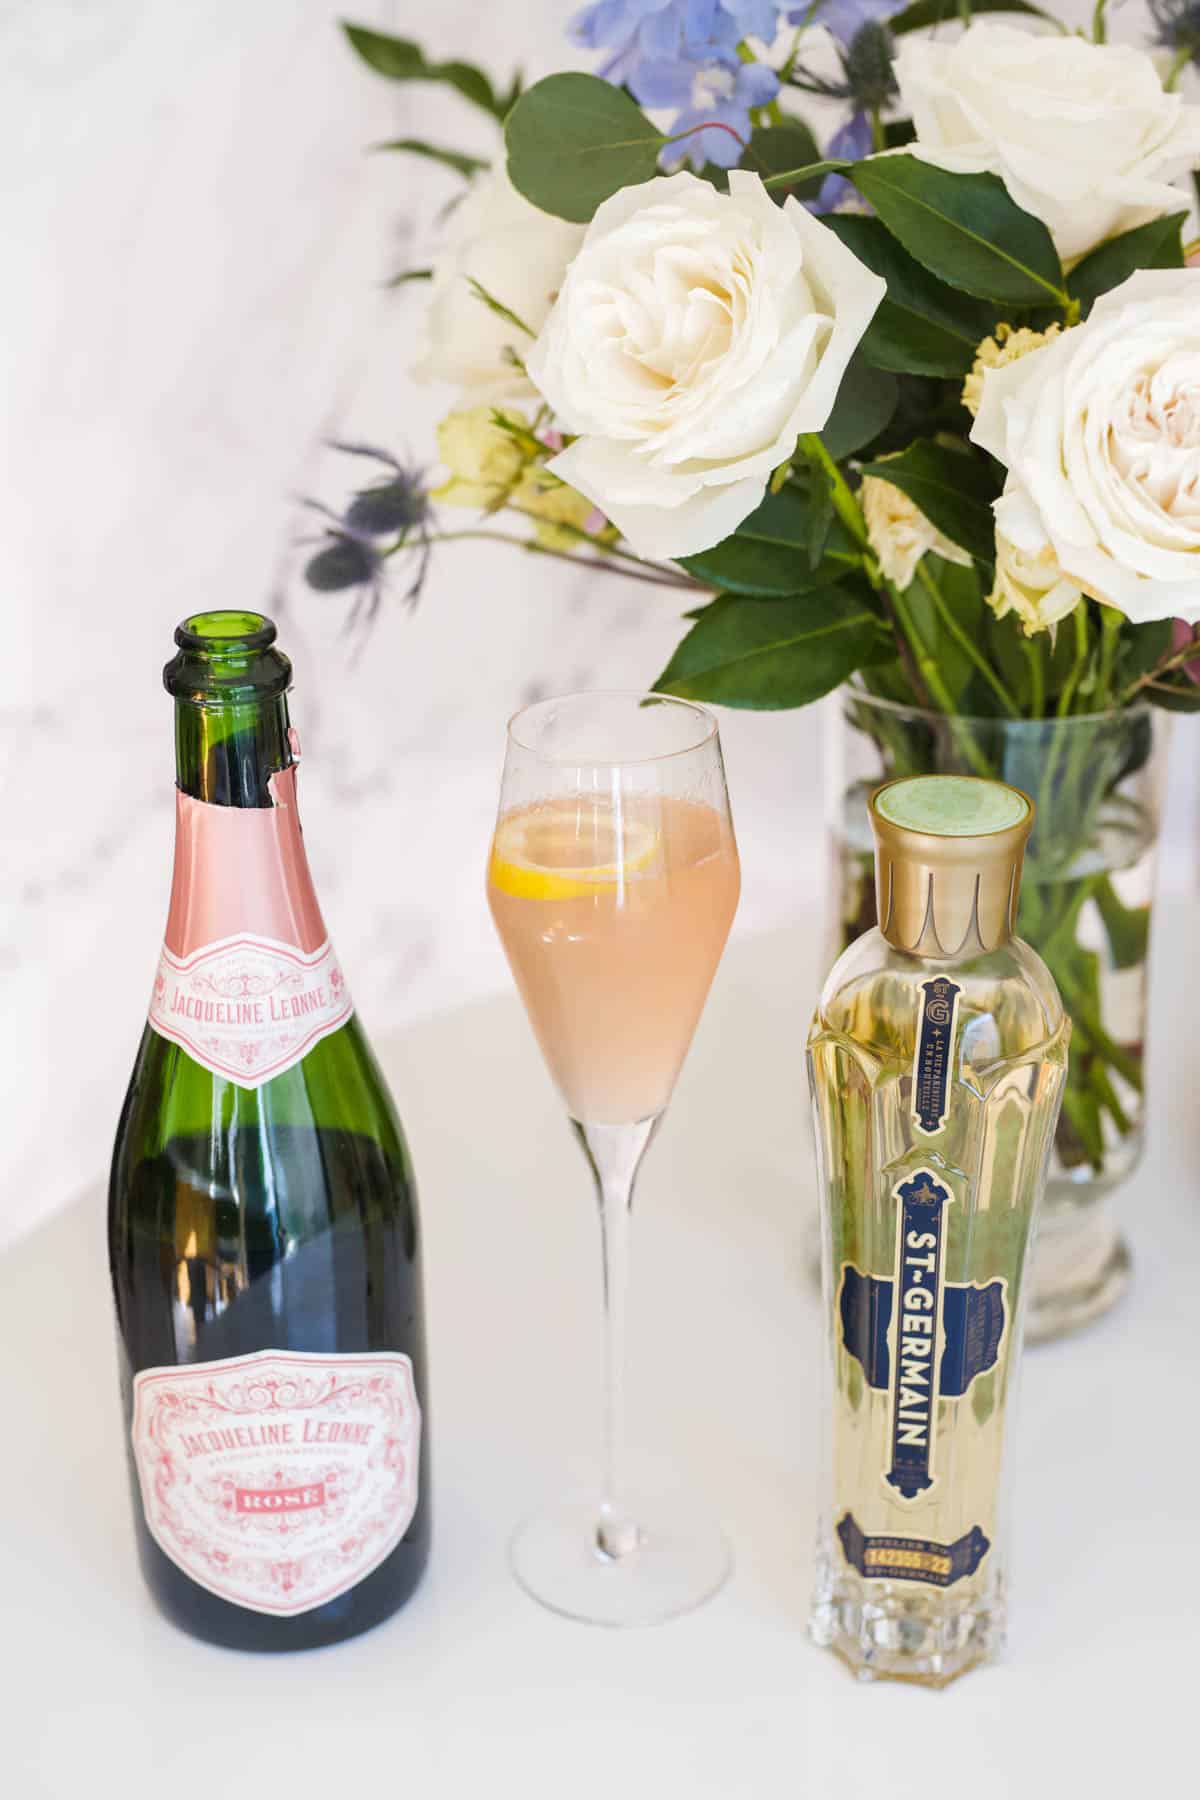 Bottles of pink champagne and St Germain next to a champagne cocktail with a vase of flowers in the background.